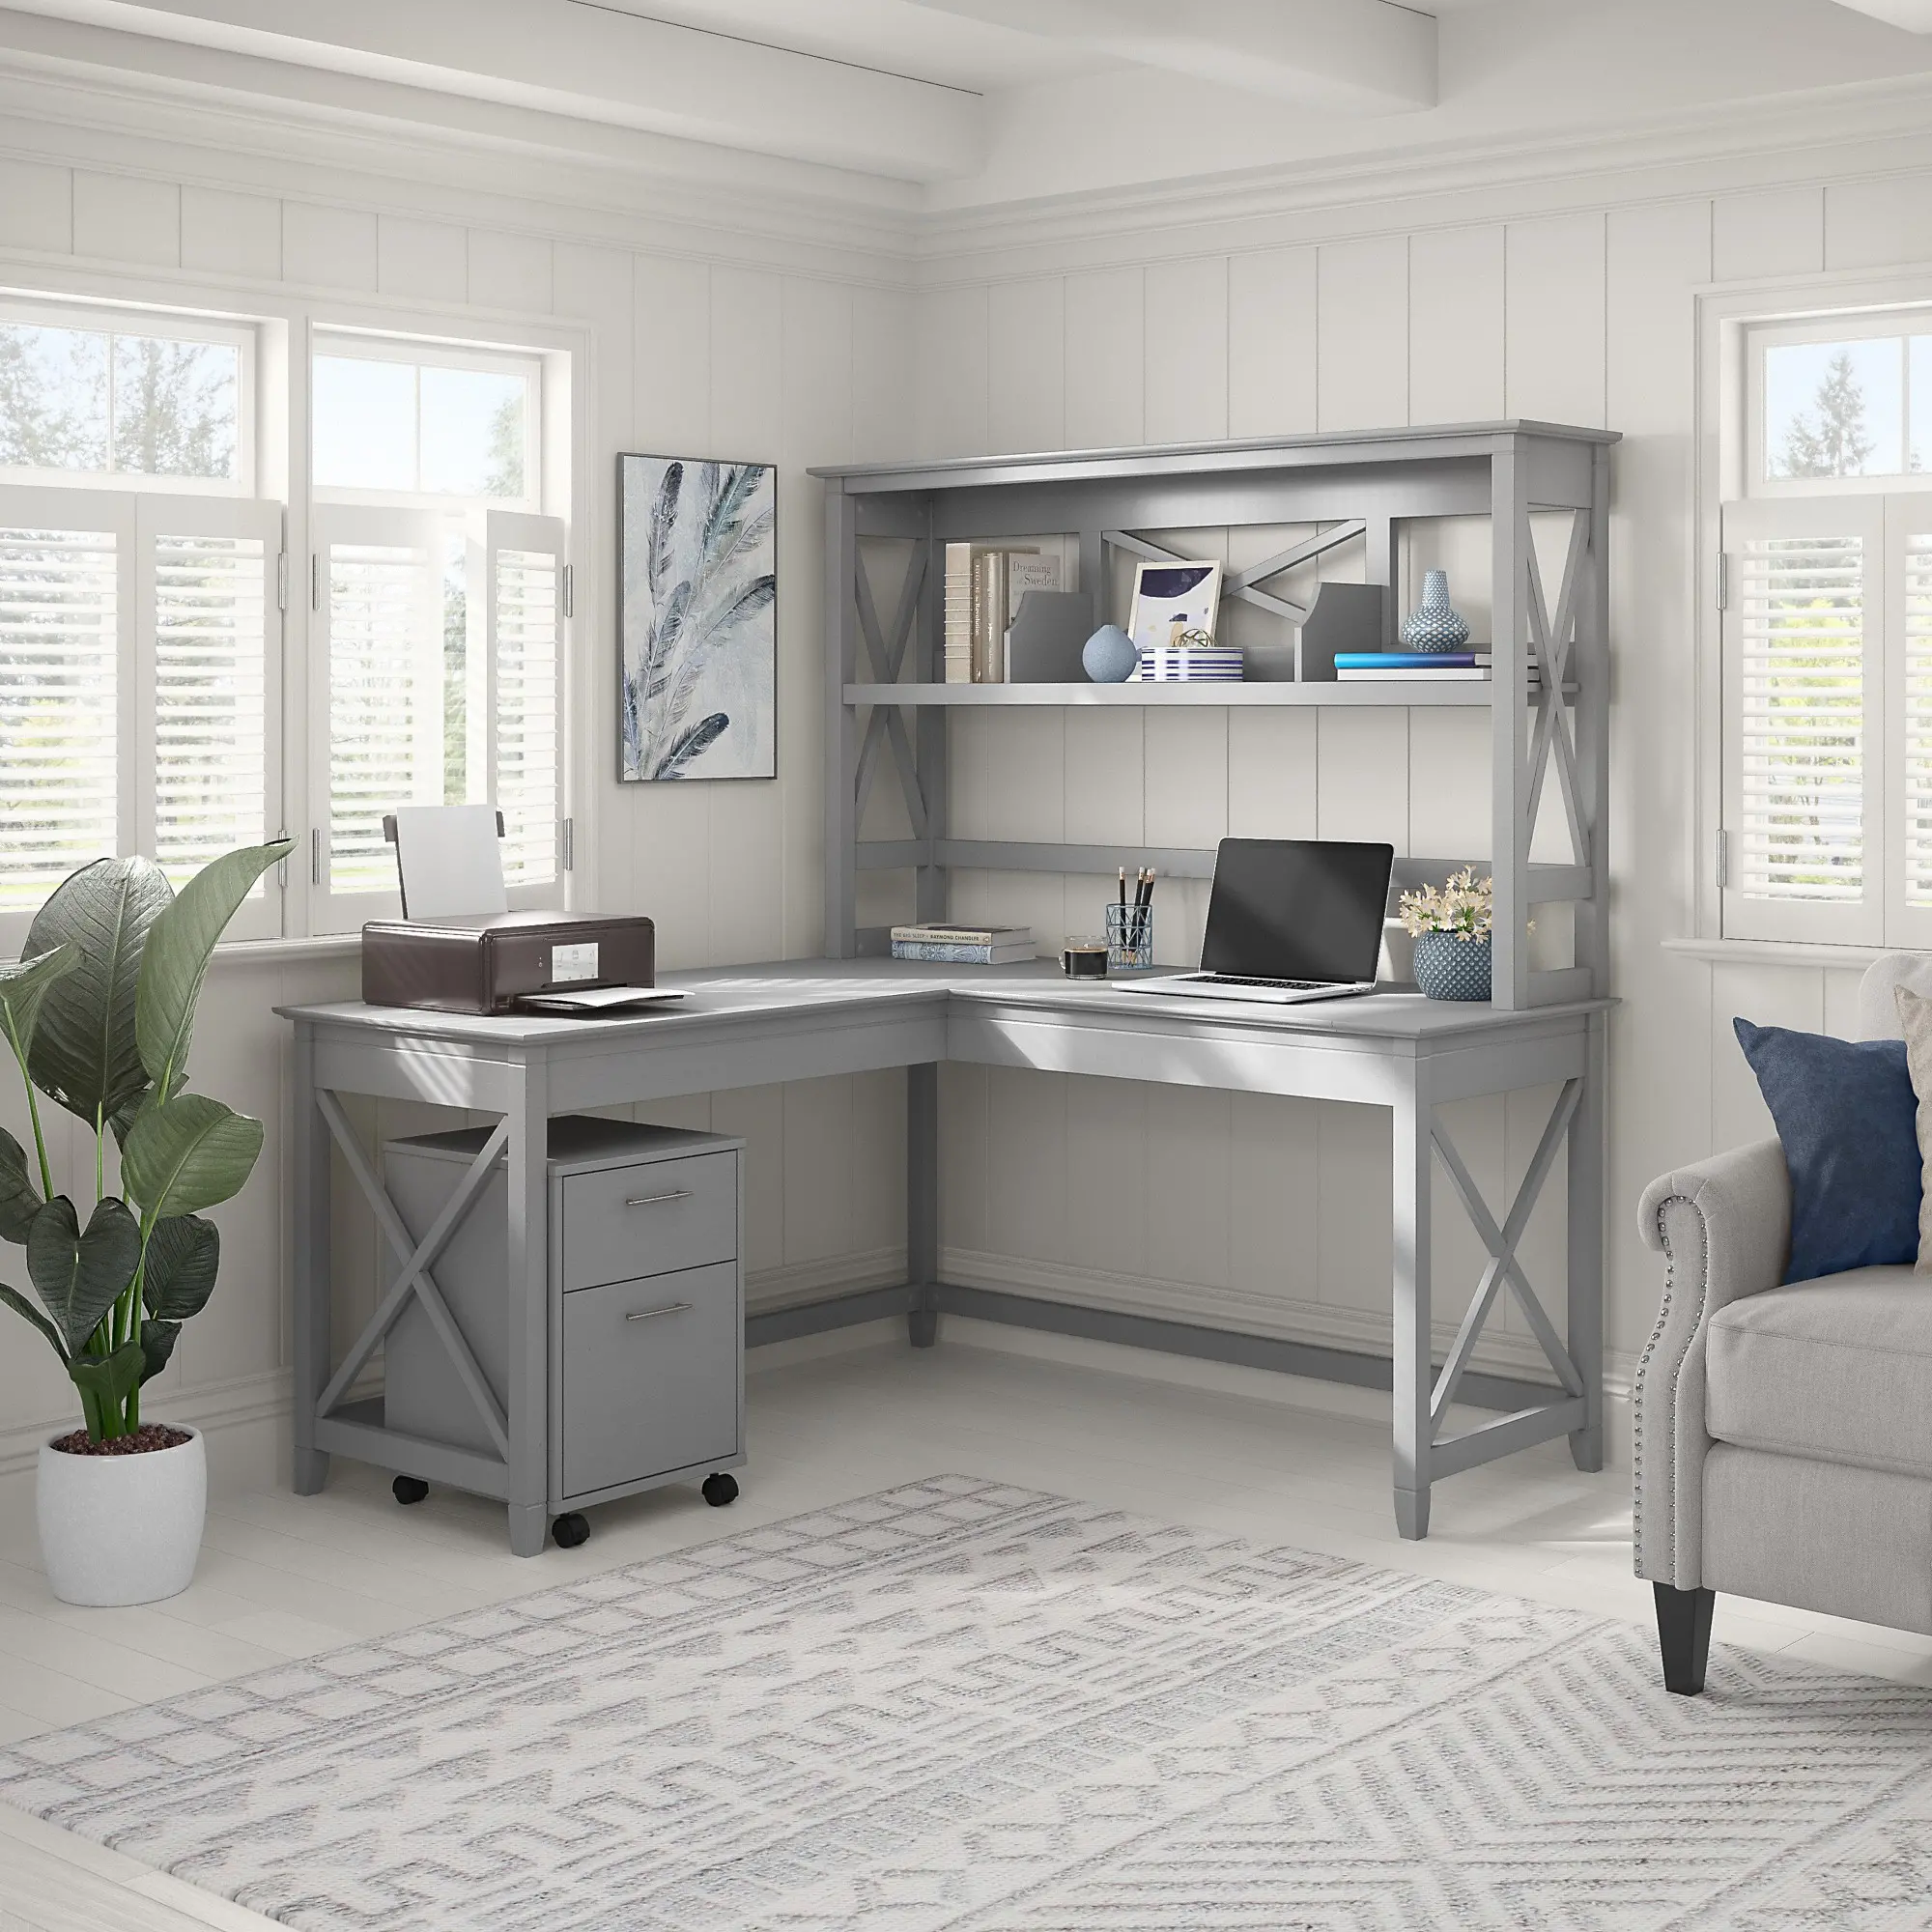 Key West Cape Cod Gray 60 Inch L Shaped Desk with Hutch and Mobile...